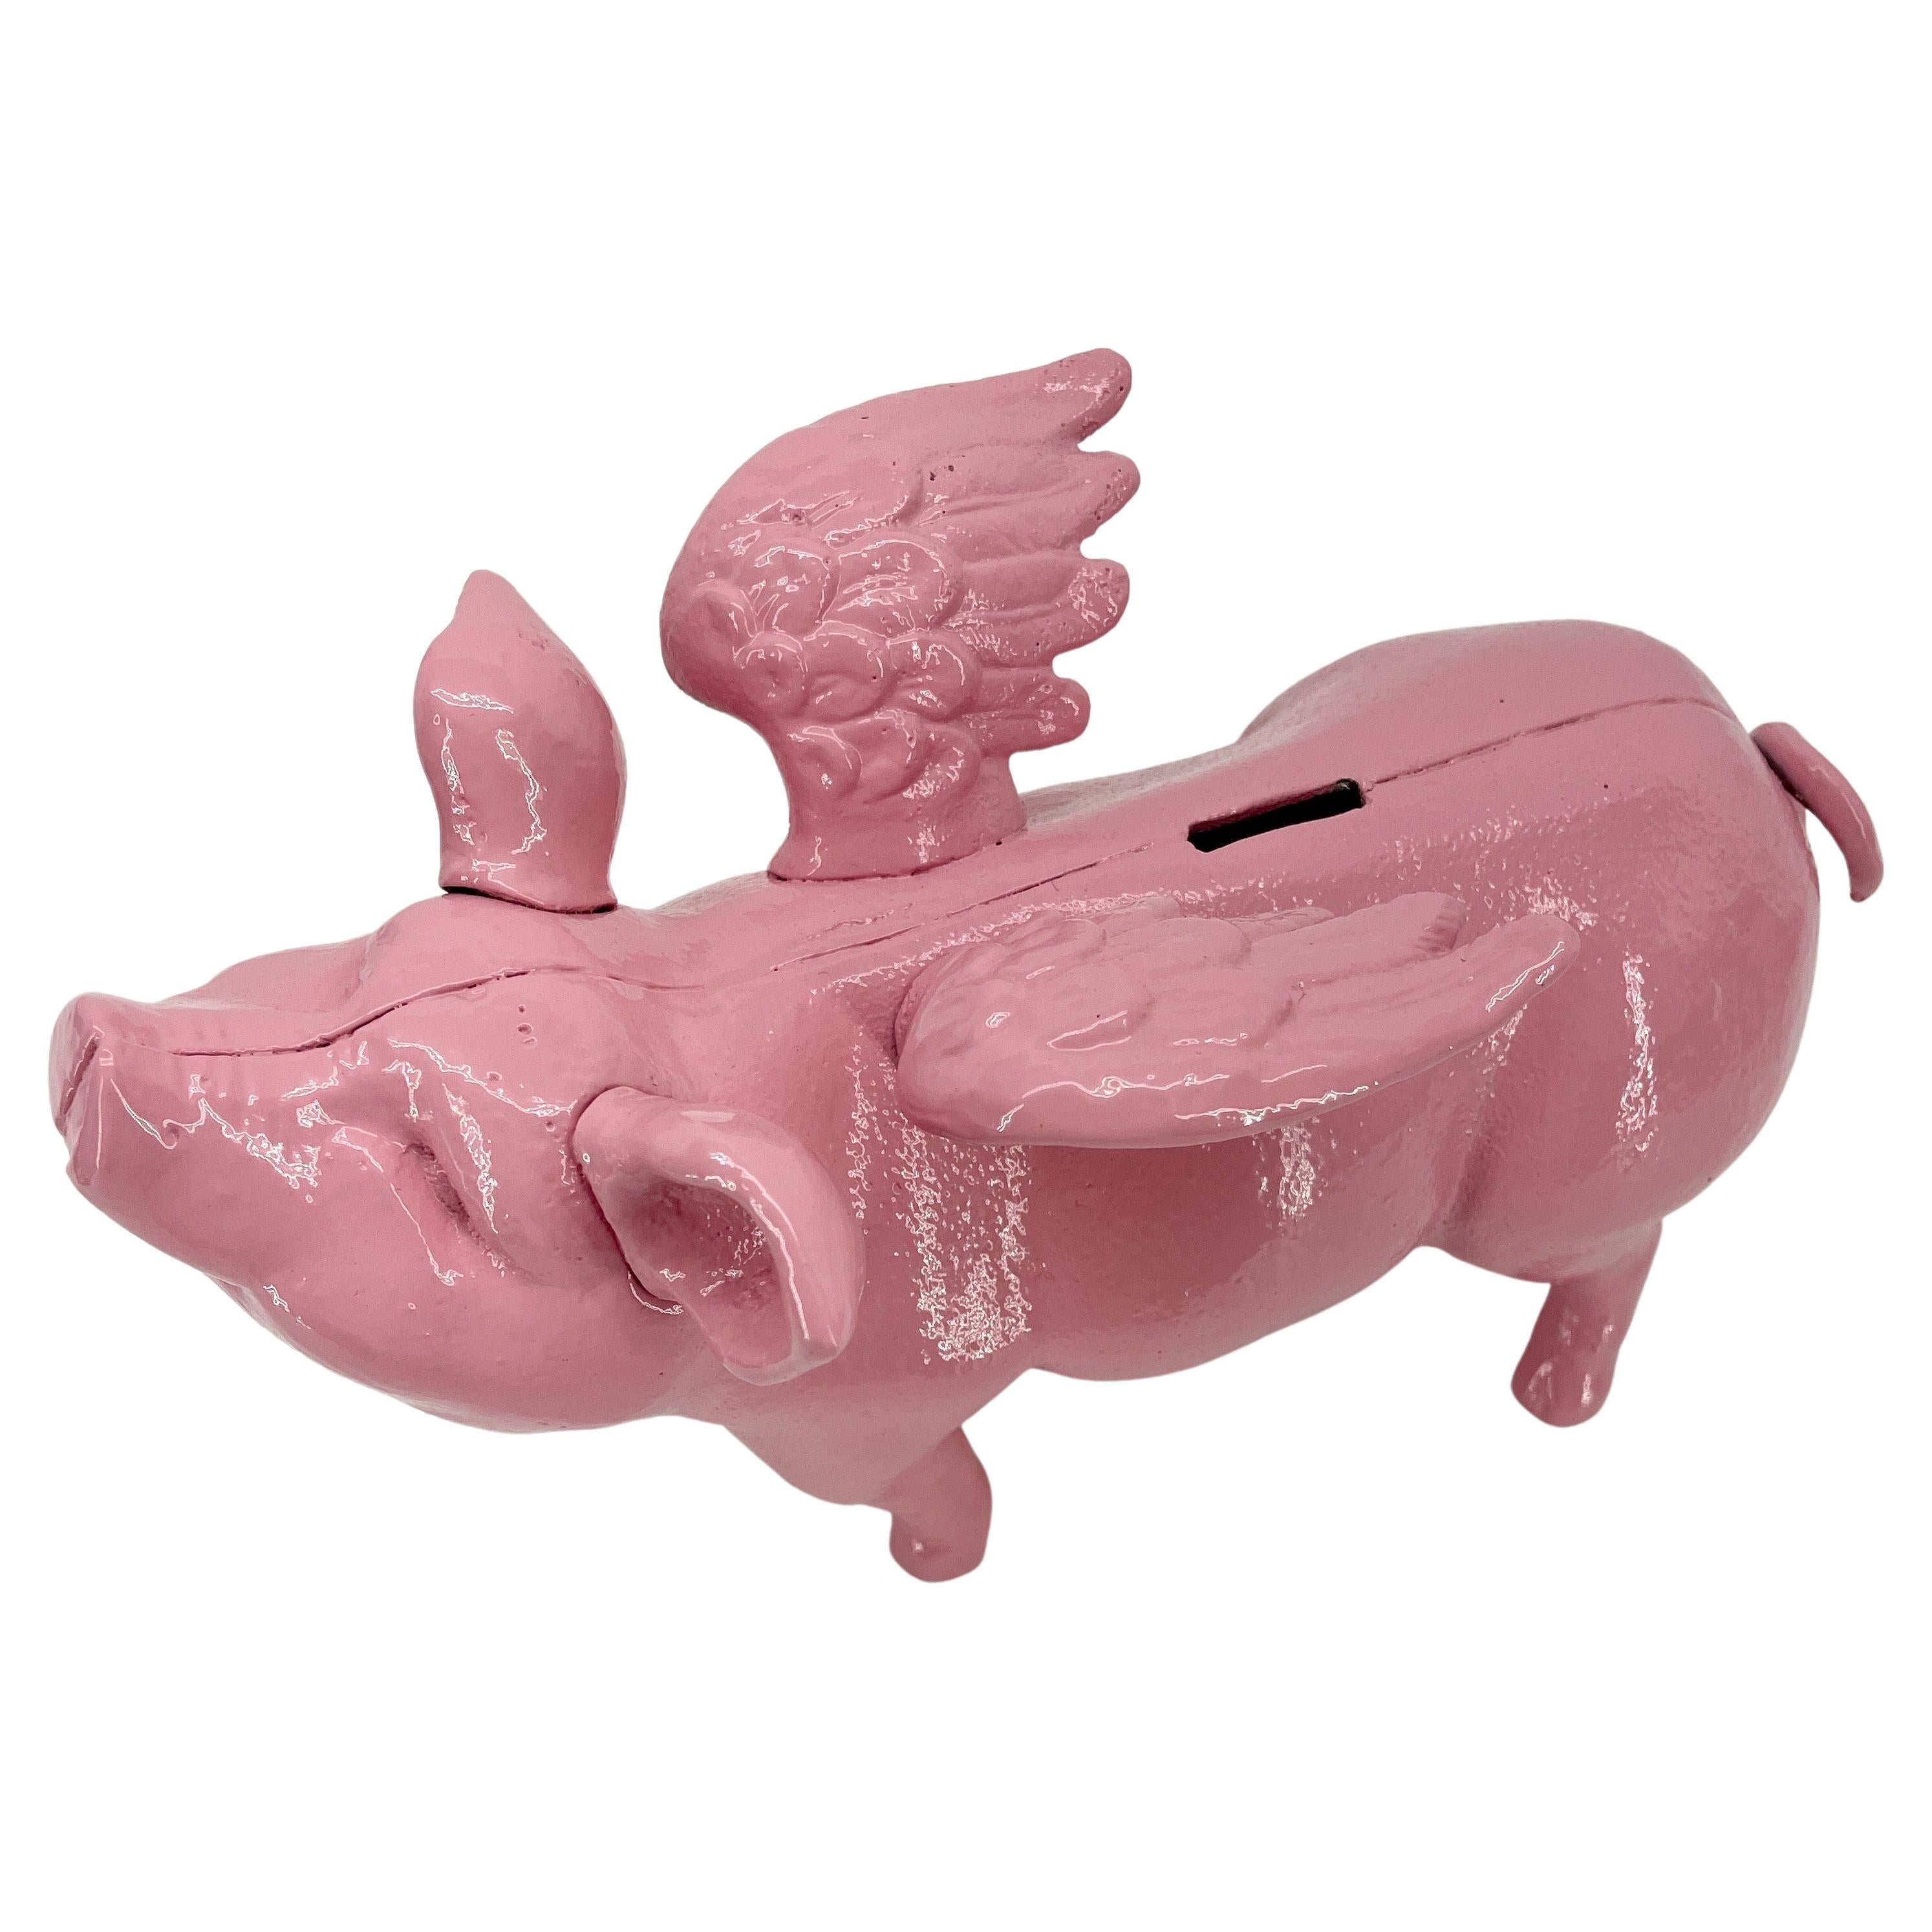 Folk Art Large Pink Cast Iron Pig Money Bank or Doorstop with Wings, Denmark